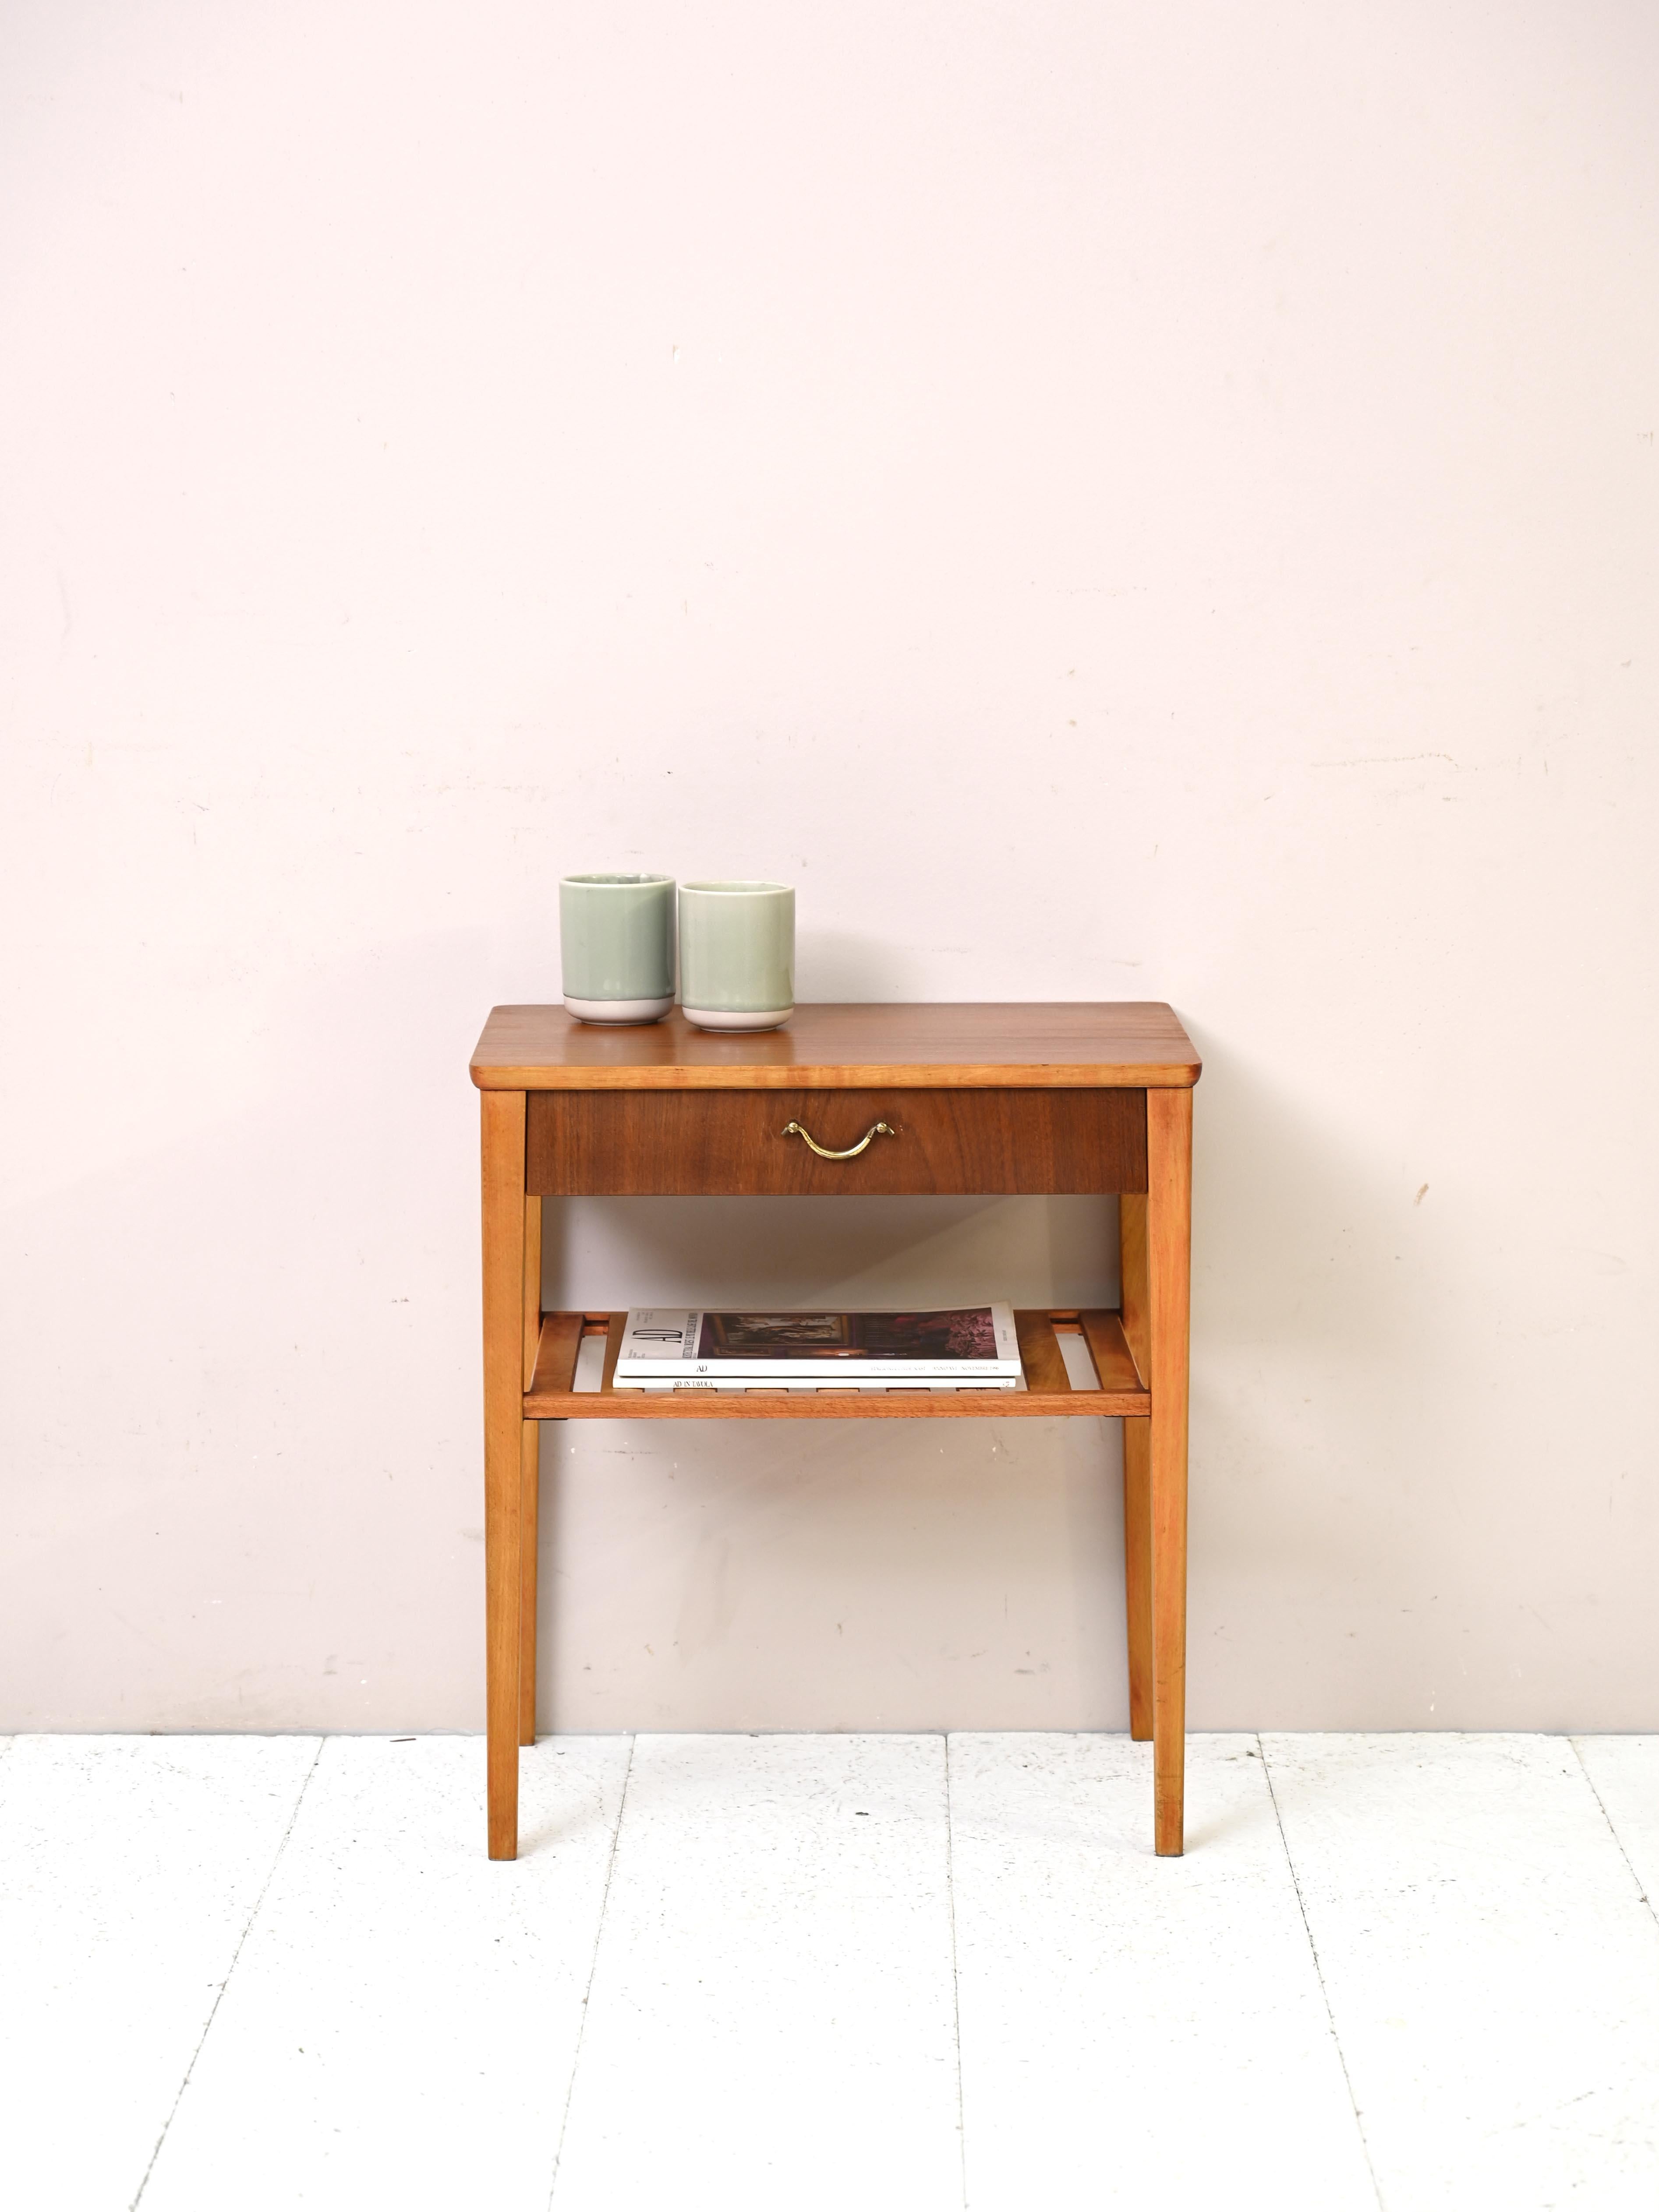 Teak and birch bedside table with golden handle.

An original piece of furniture from the 1960s in perfect retro style.
The top is teak as is the drawer. The legs and magazine rack top, on the other hand, are made of birch. The use of the two